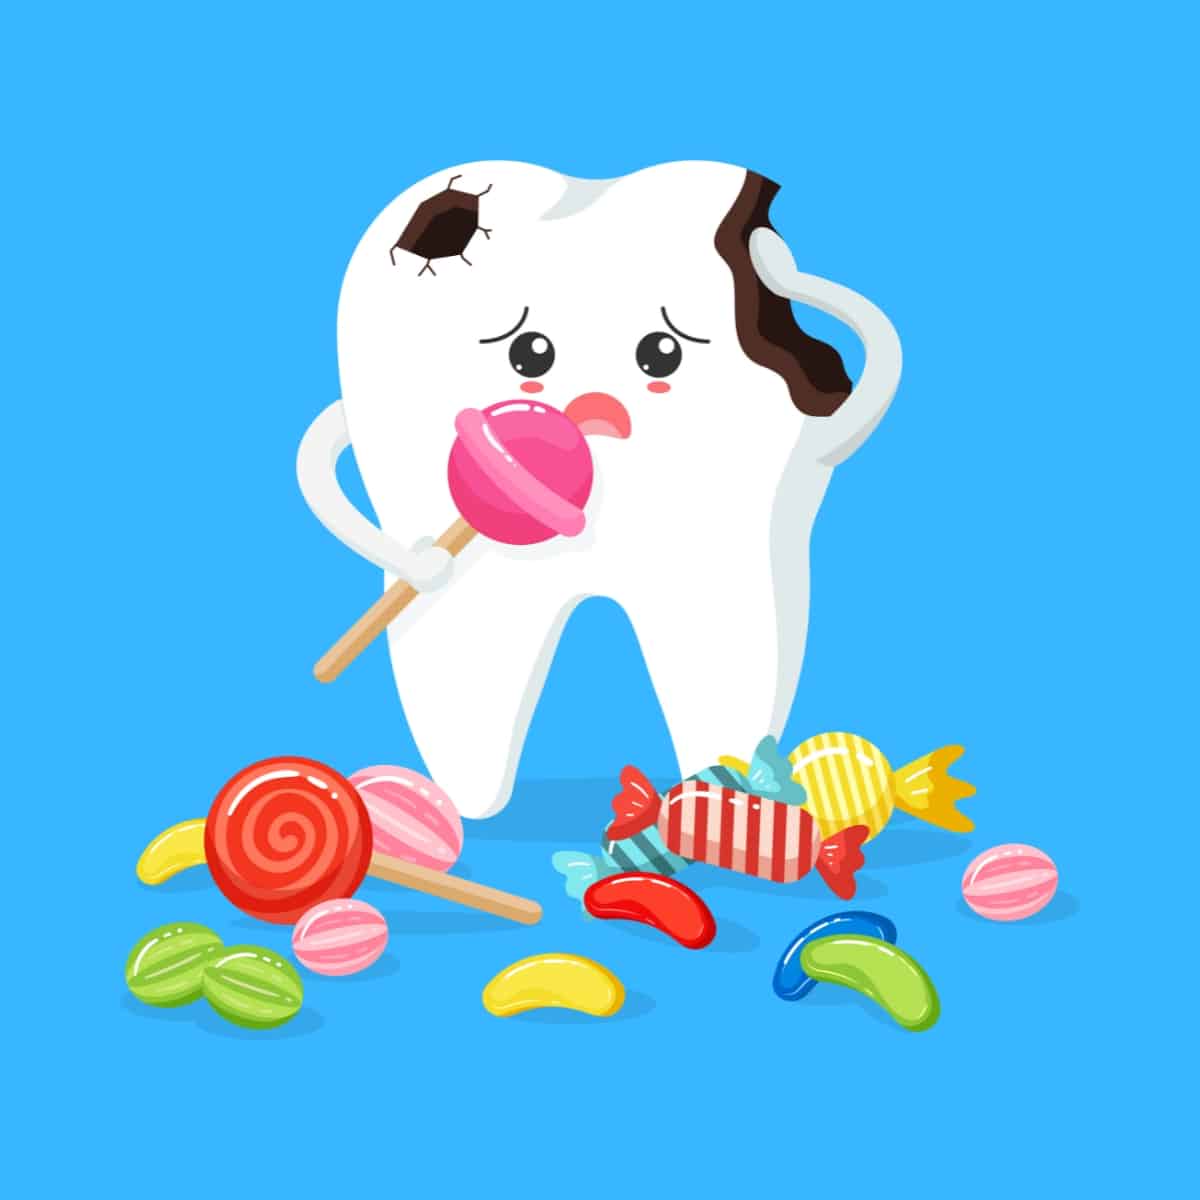 Cartoon graphic of a sore tooth holding candy on blue background.